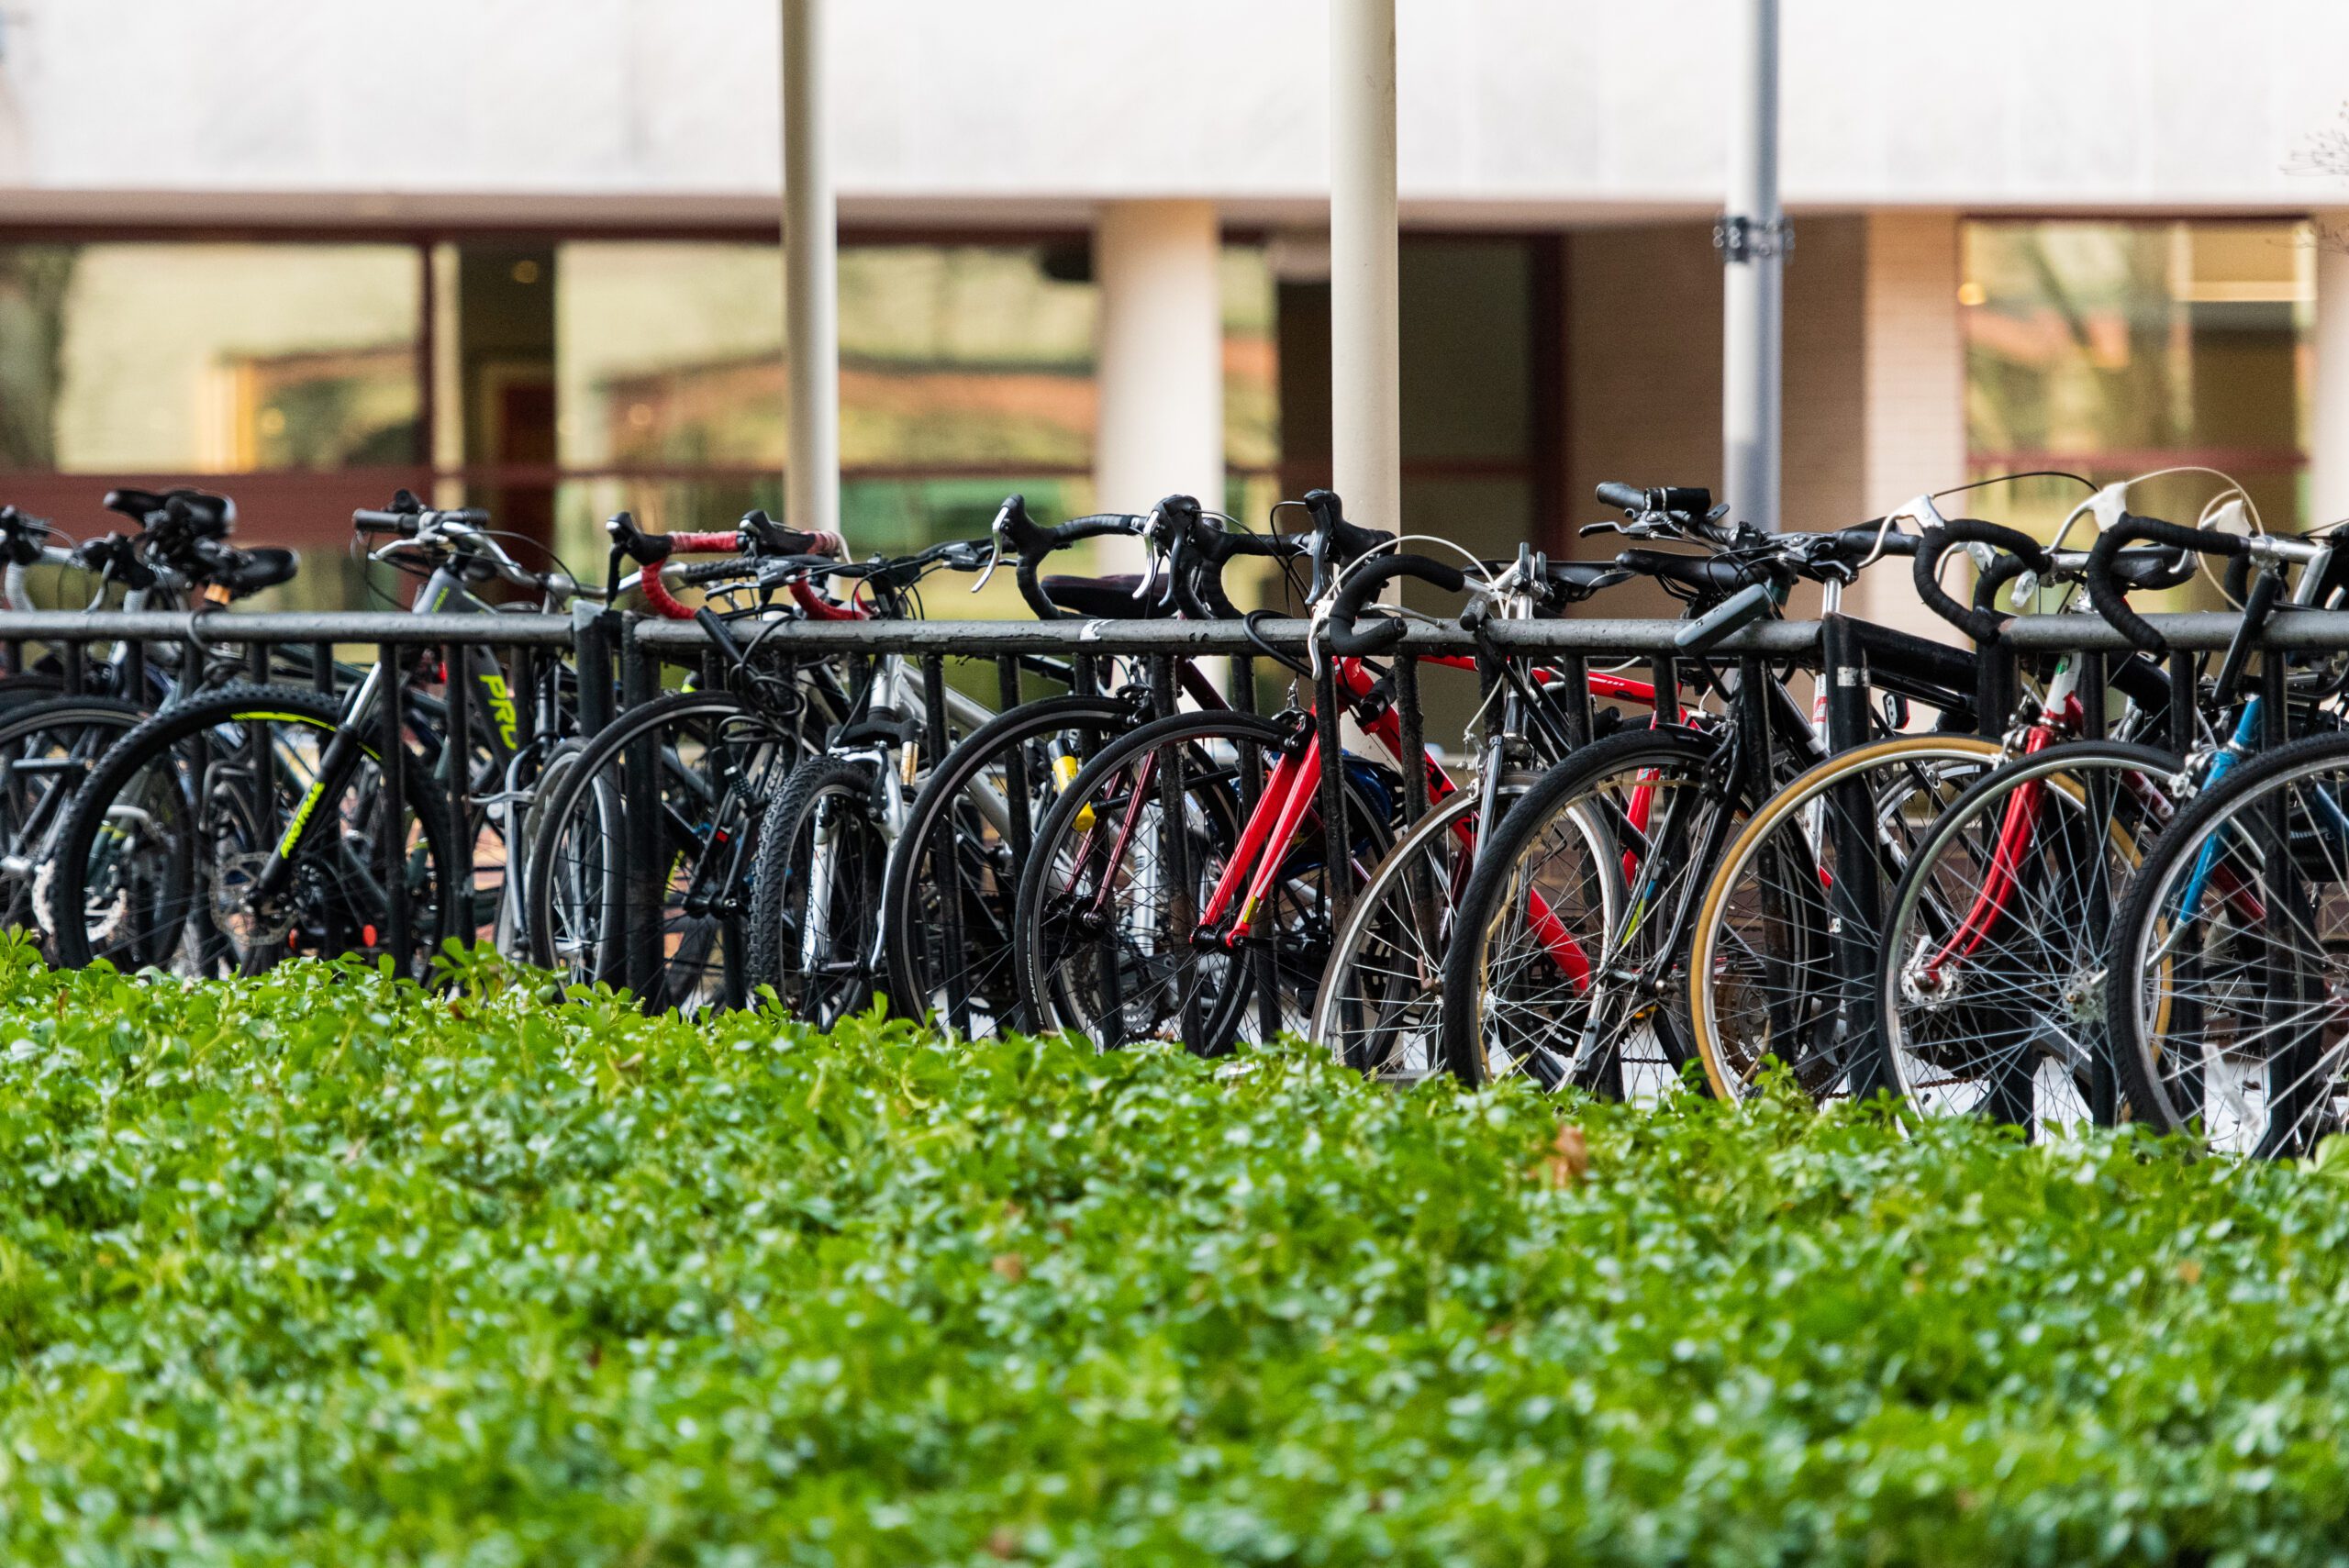 Full view of a bycicle parking, filled with bikes, in front of a green garden.